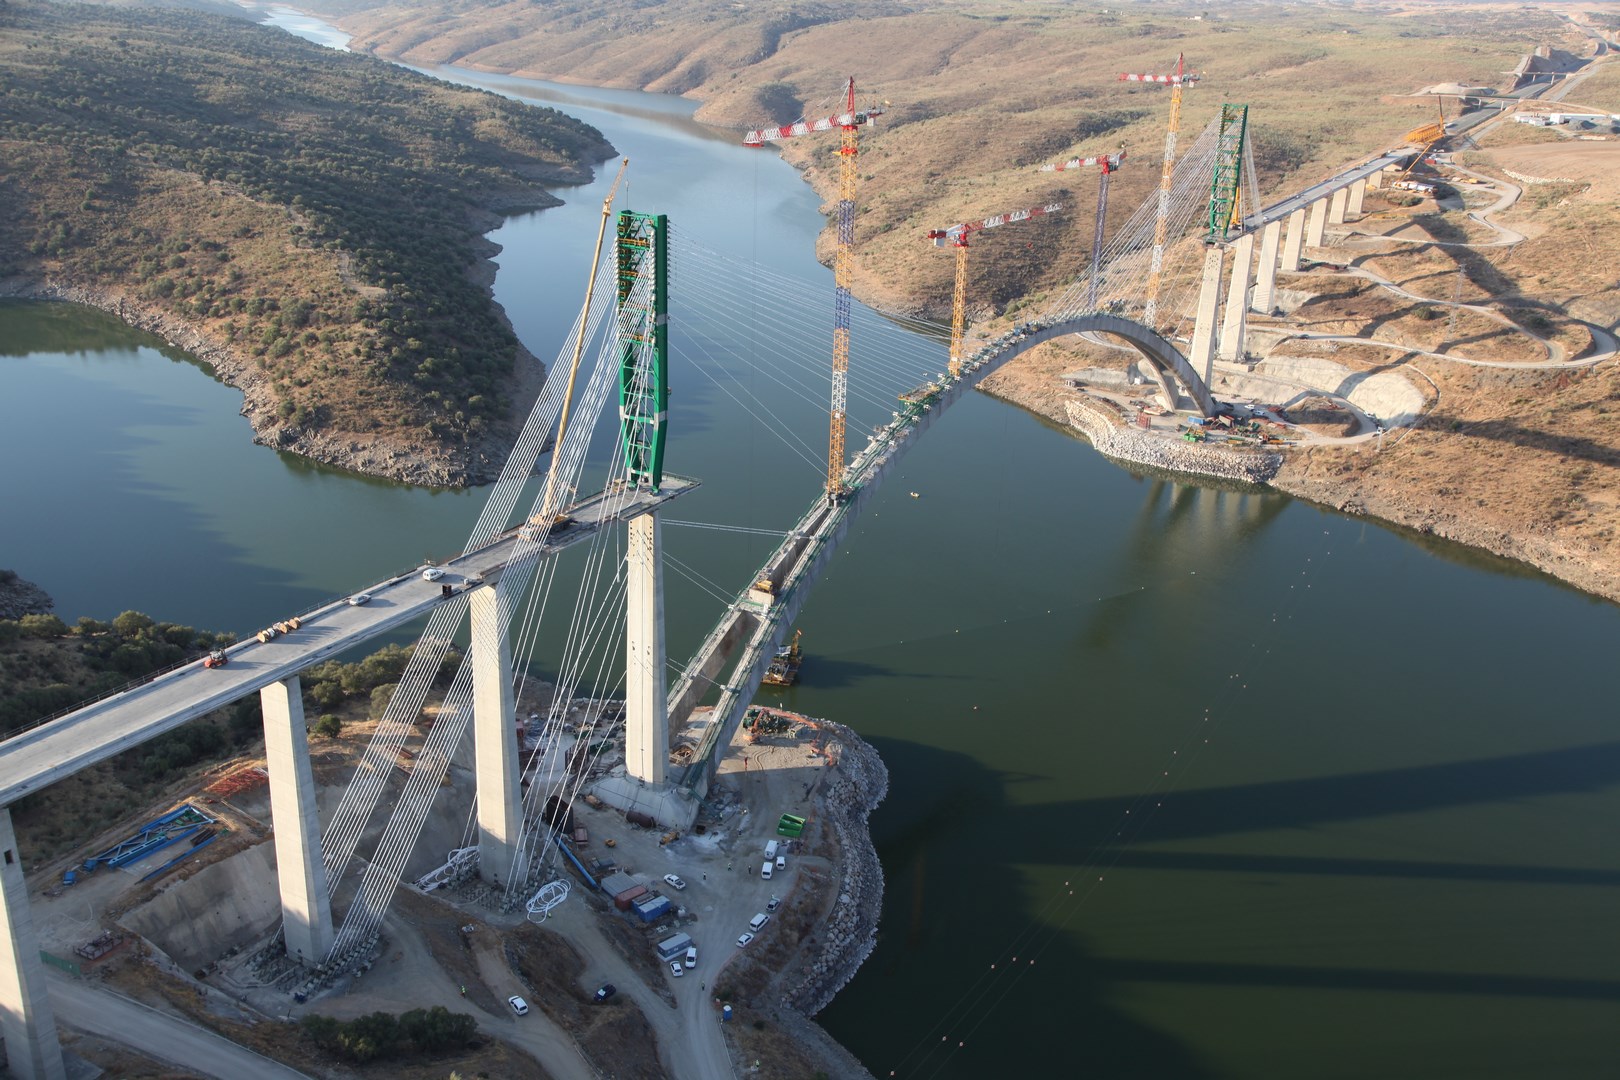 Construction of the Almonte Viaduct